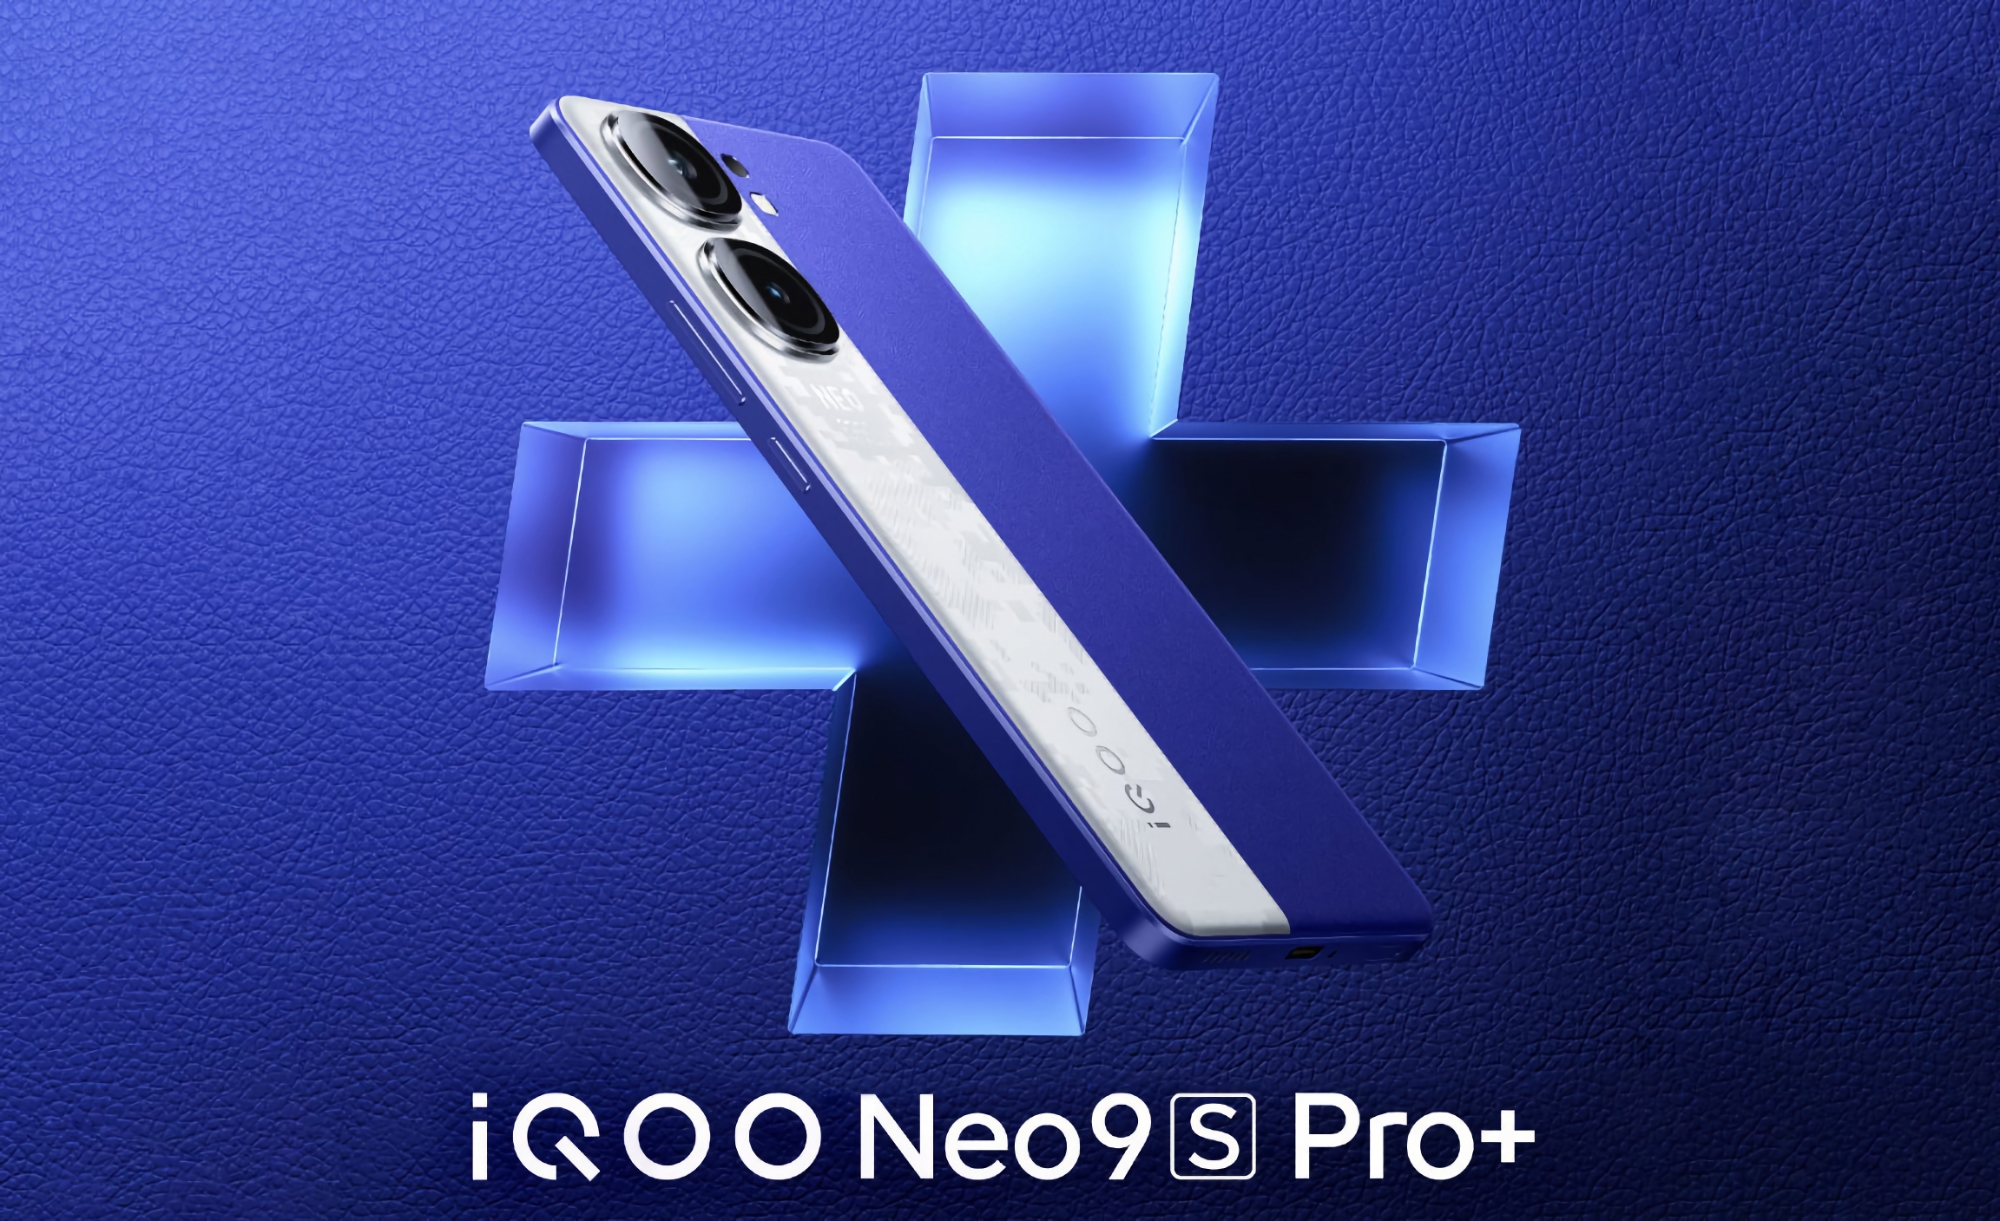 The iQOO Neo 9S Pro+ with Snapdragon 8 Gen 3 chip will debut in July